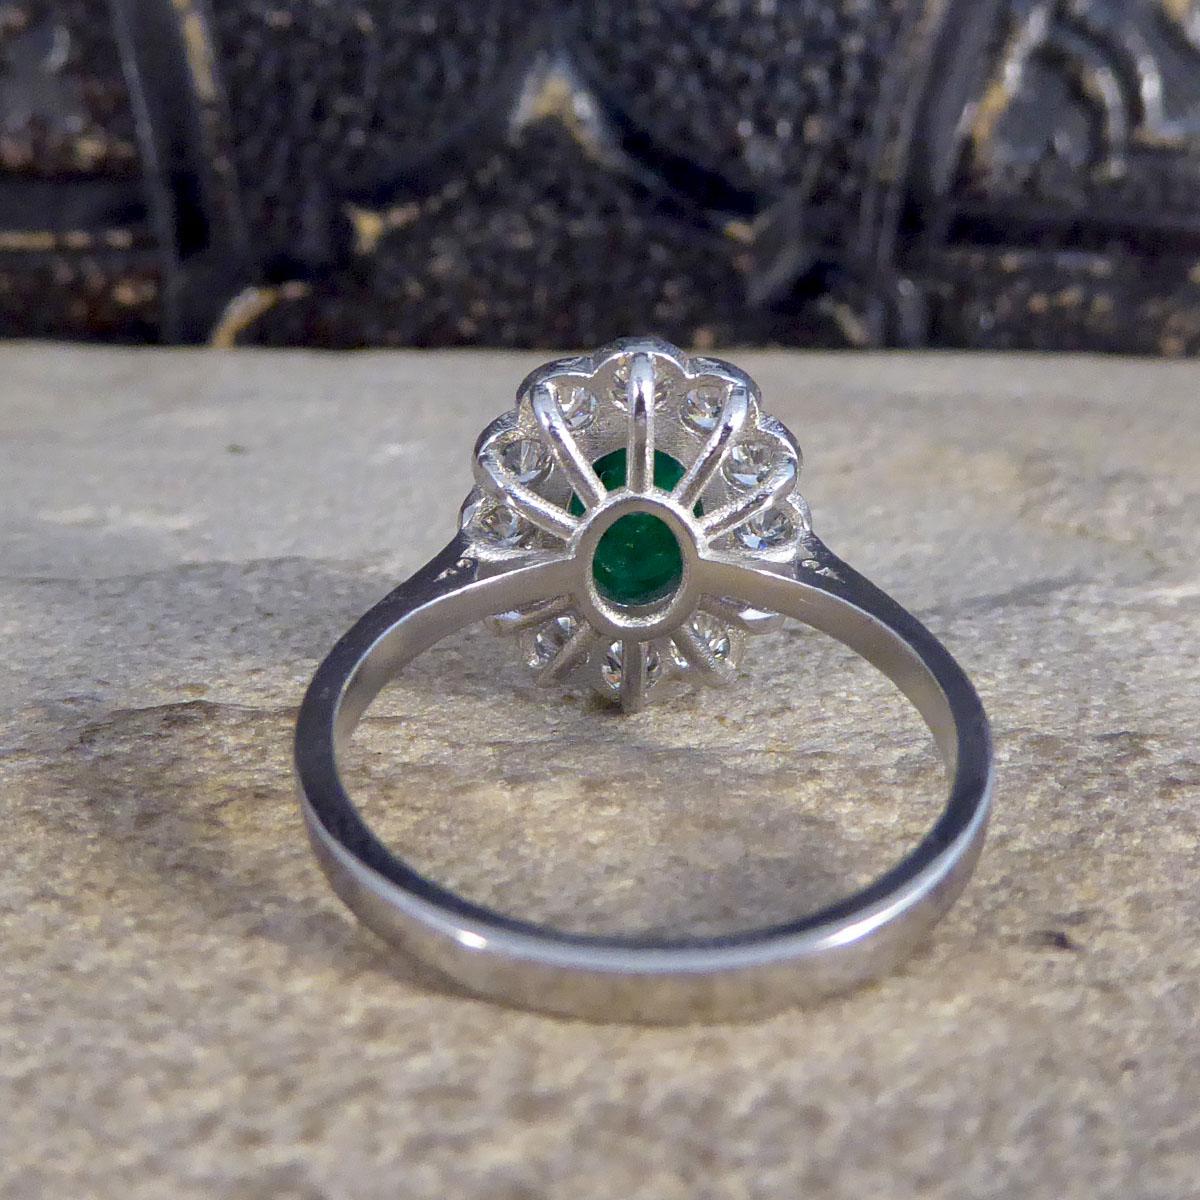 1.27ct Cabochon Emerald and 1.02ct Diamond Cluster Ring in Platinum In Good Condition For Sale In Yorkshire, West Yorkshire